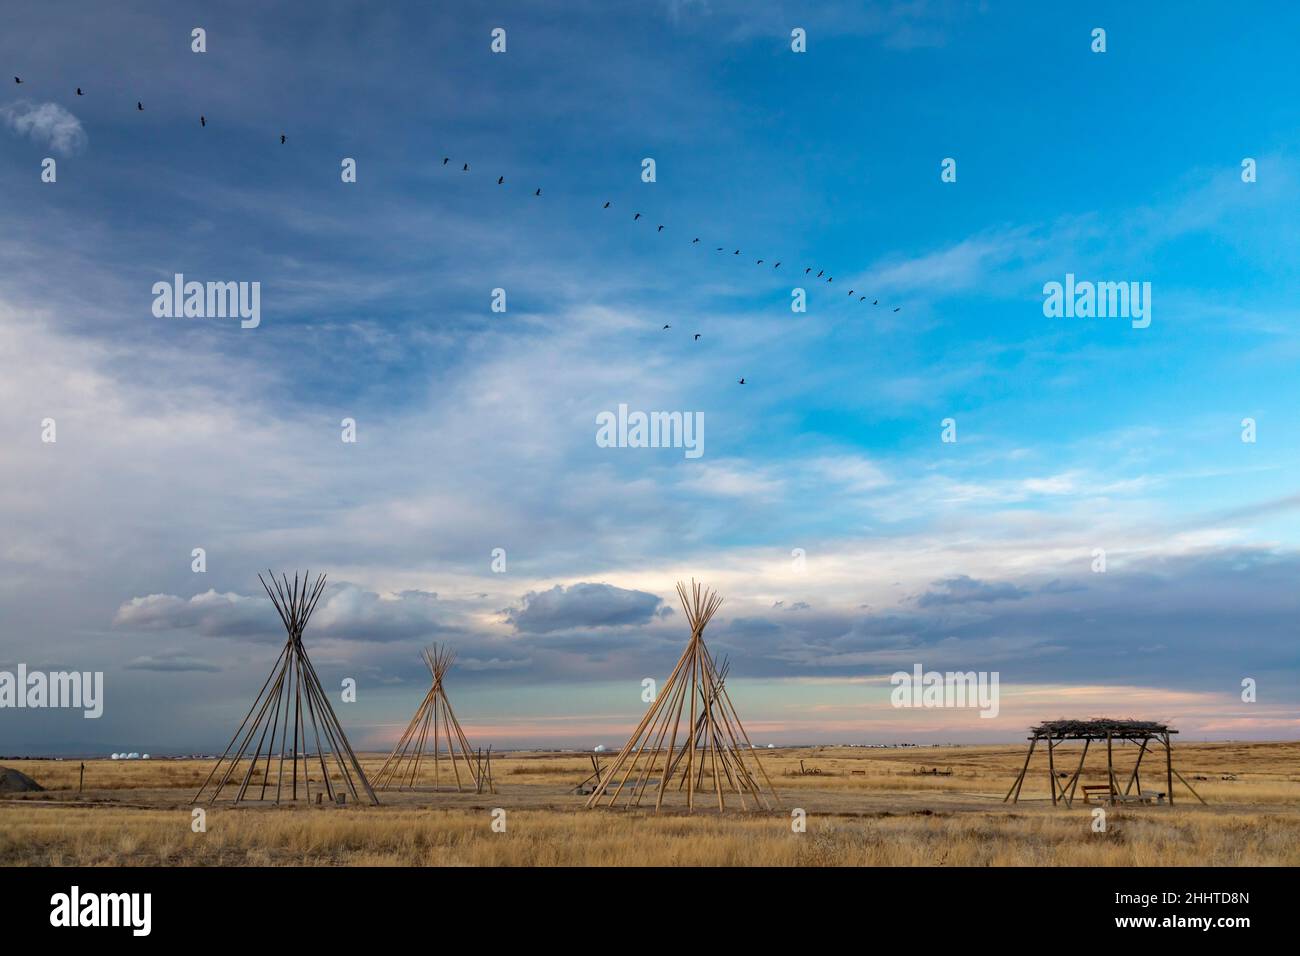 Aurora, Colorado - A tipi camp at the Plains Conservation Center. The Center is an 1100-acre remnant prairie preserve, with the tipi camp and a sod ho Stock Photo